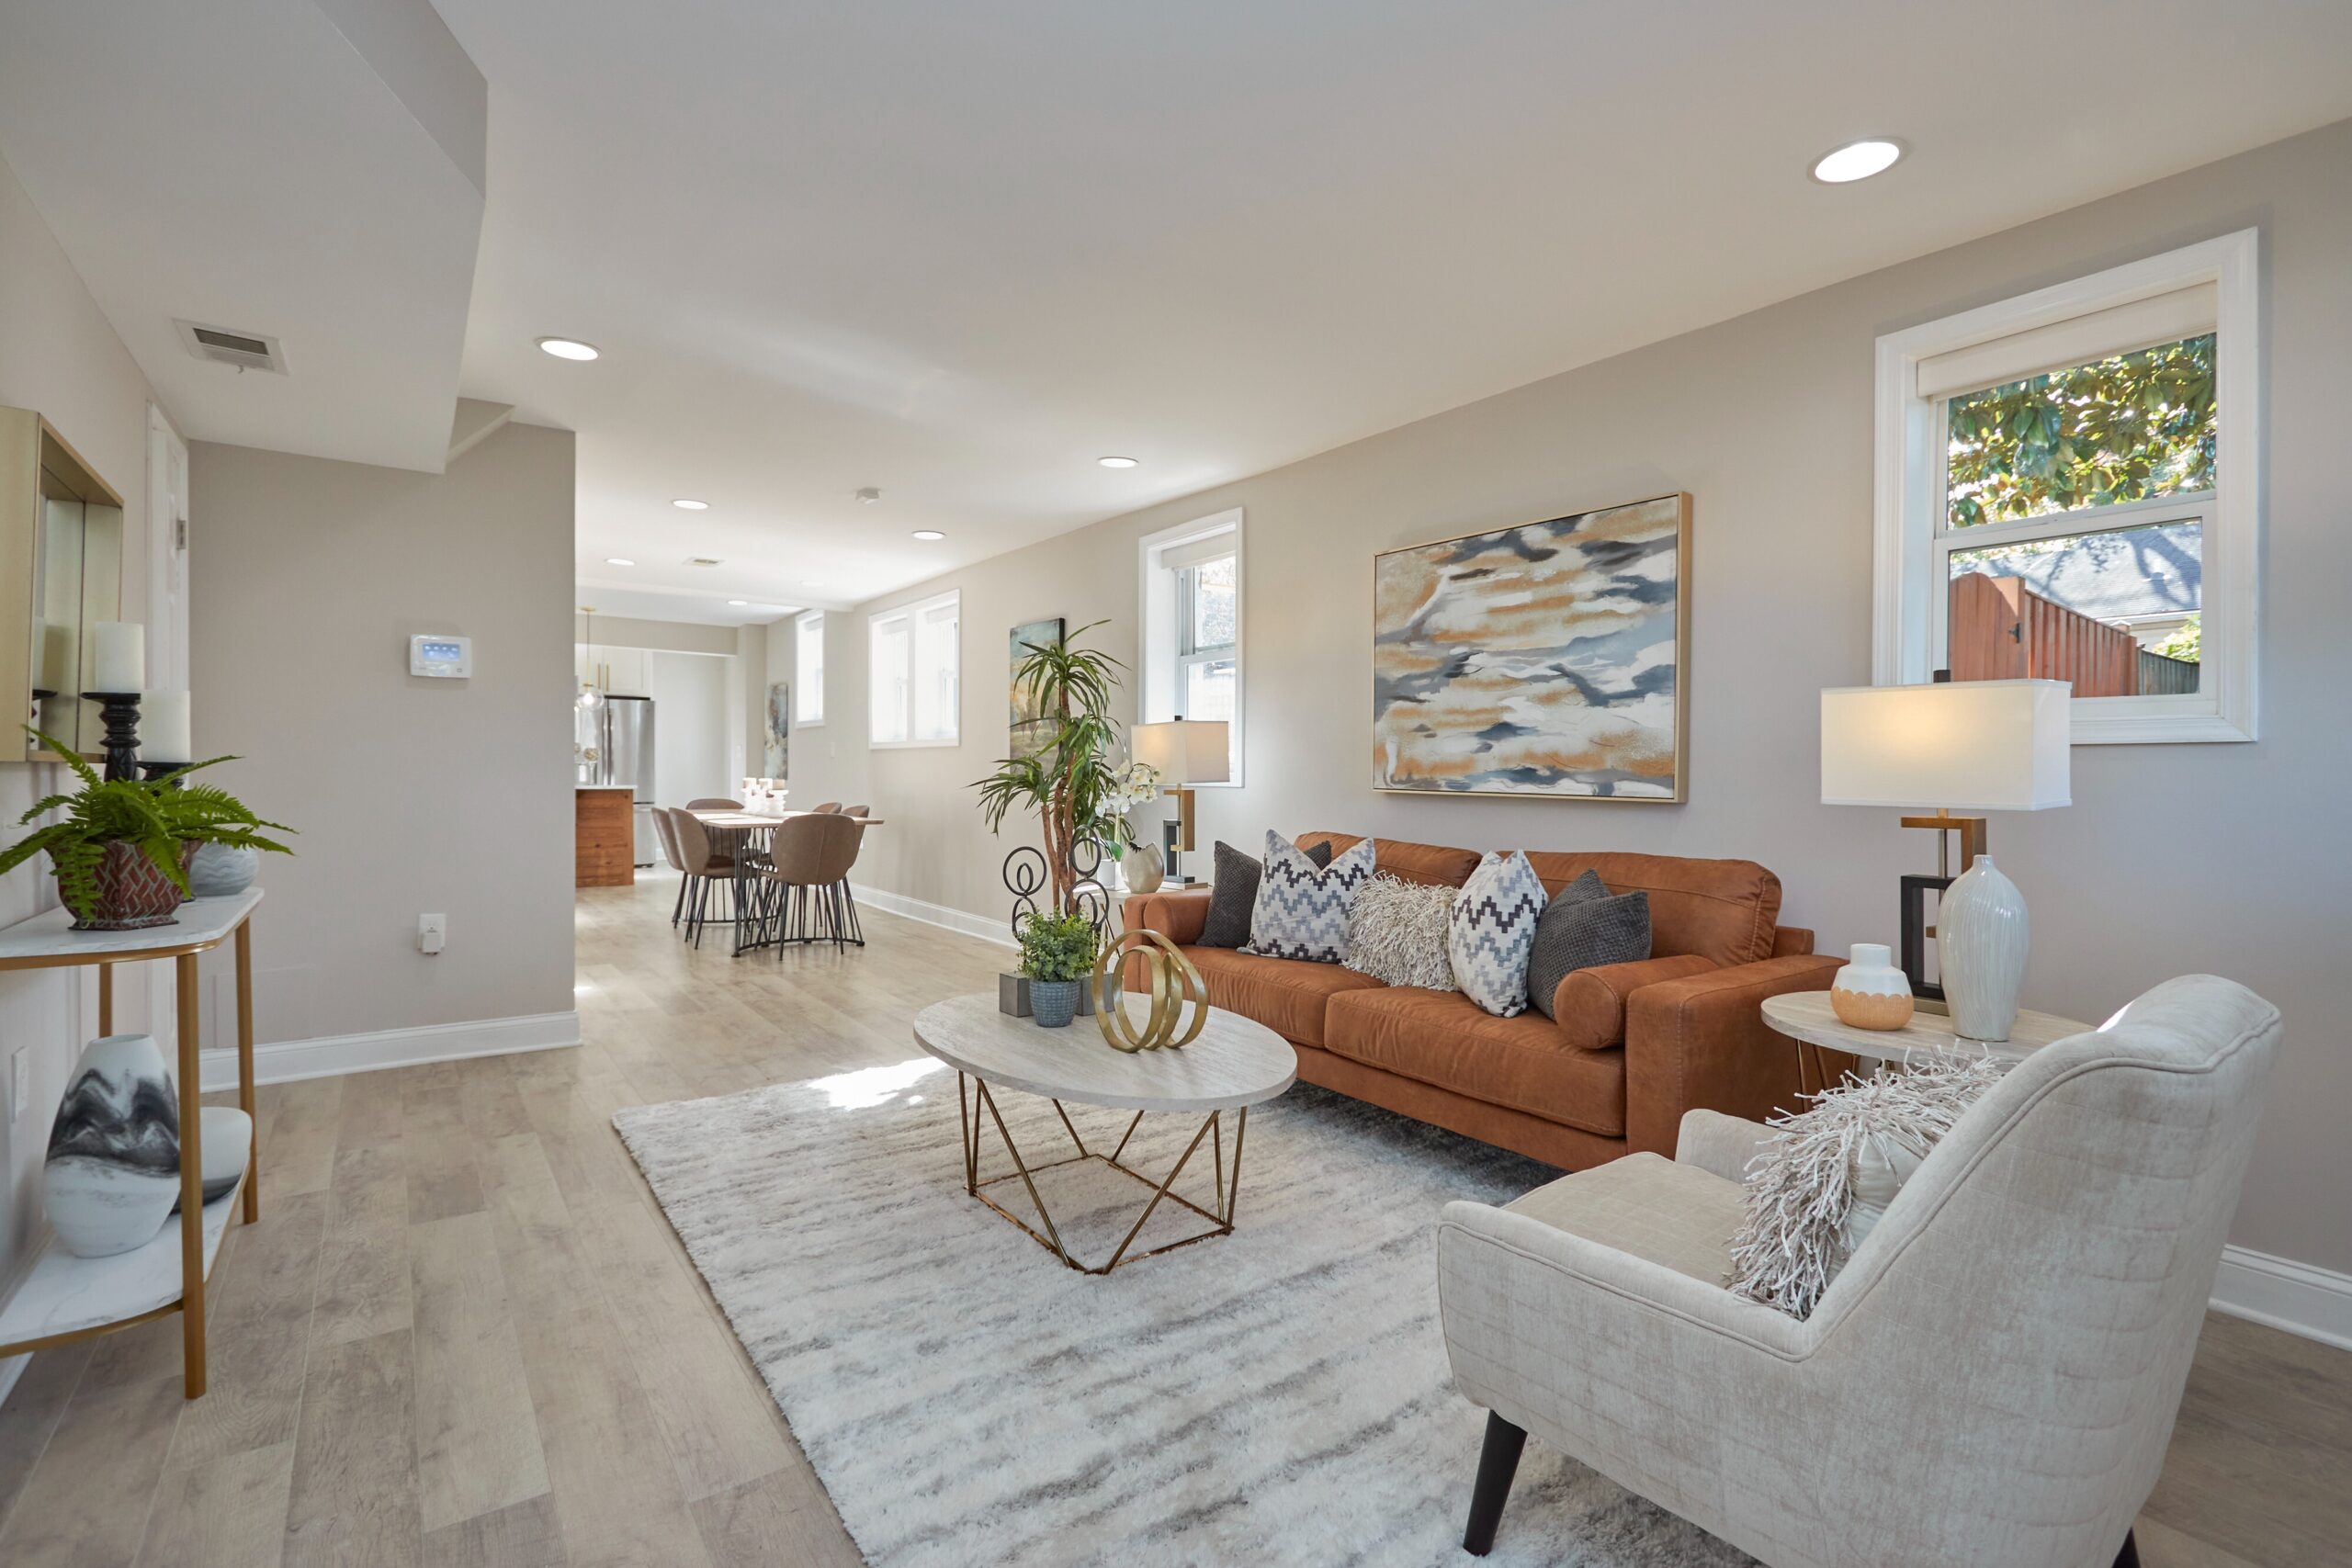 Professional interior photo of 1219 50th St NE in Washington, DC - showing the living room that flows openly back through the dining room to the kitchen